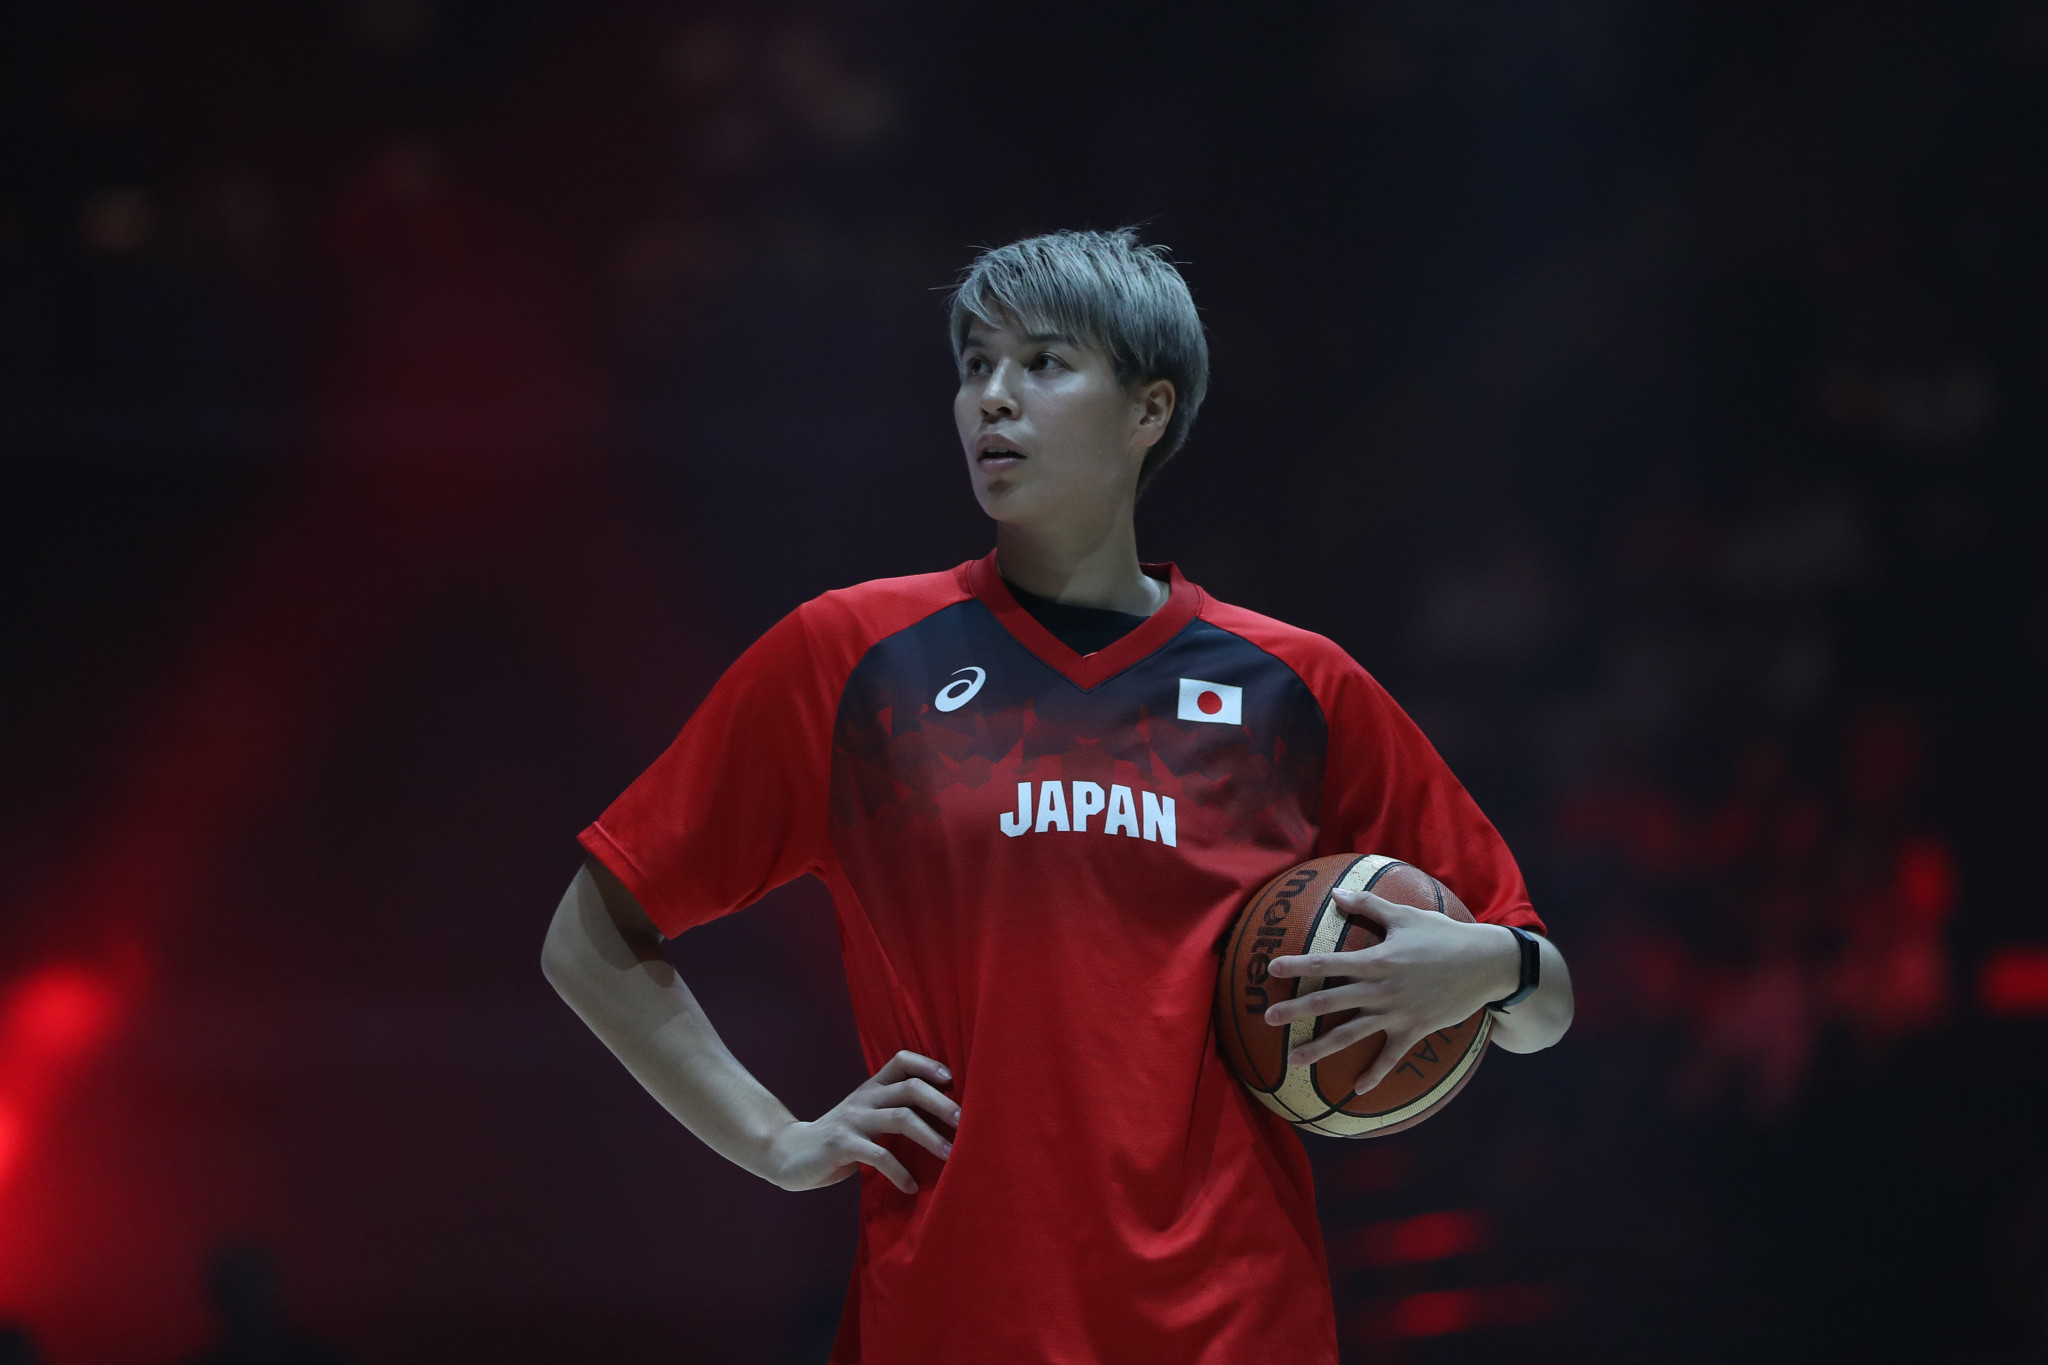 Japanese star basketball player Ramu Tokashiki has tore her ACL ©Getty Images